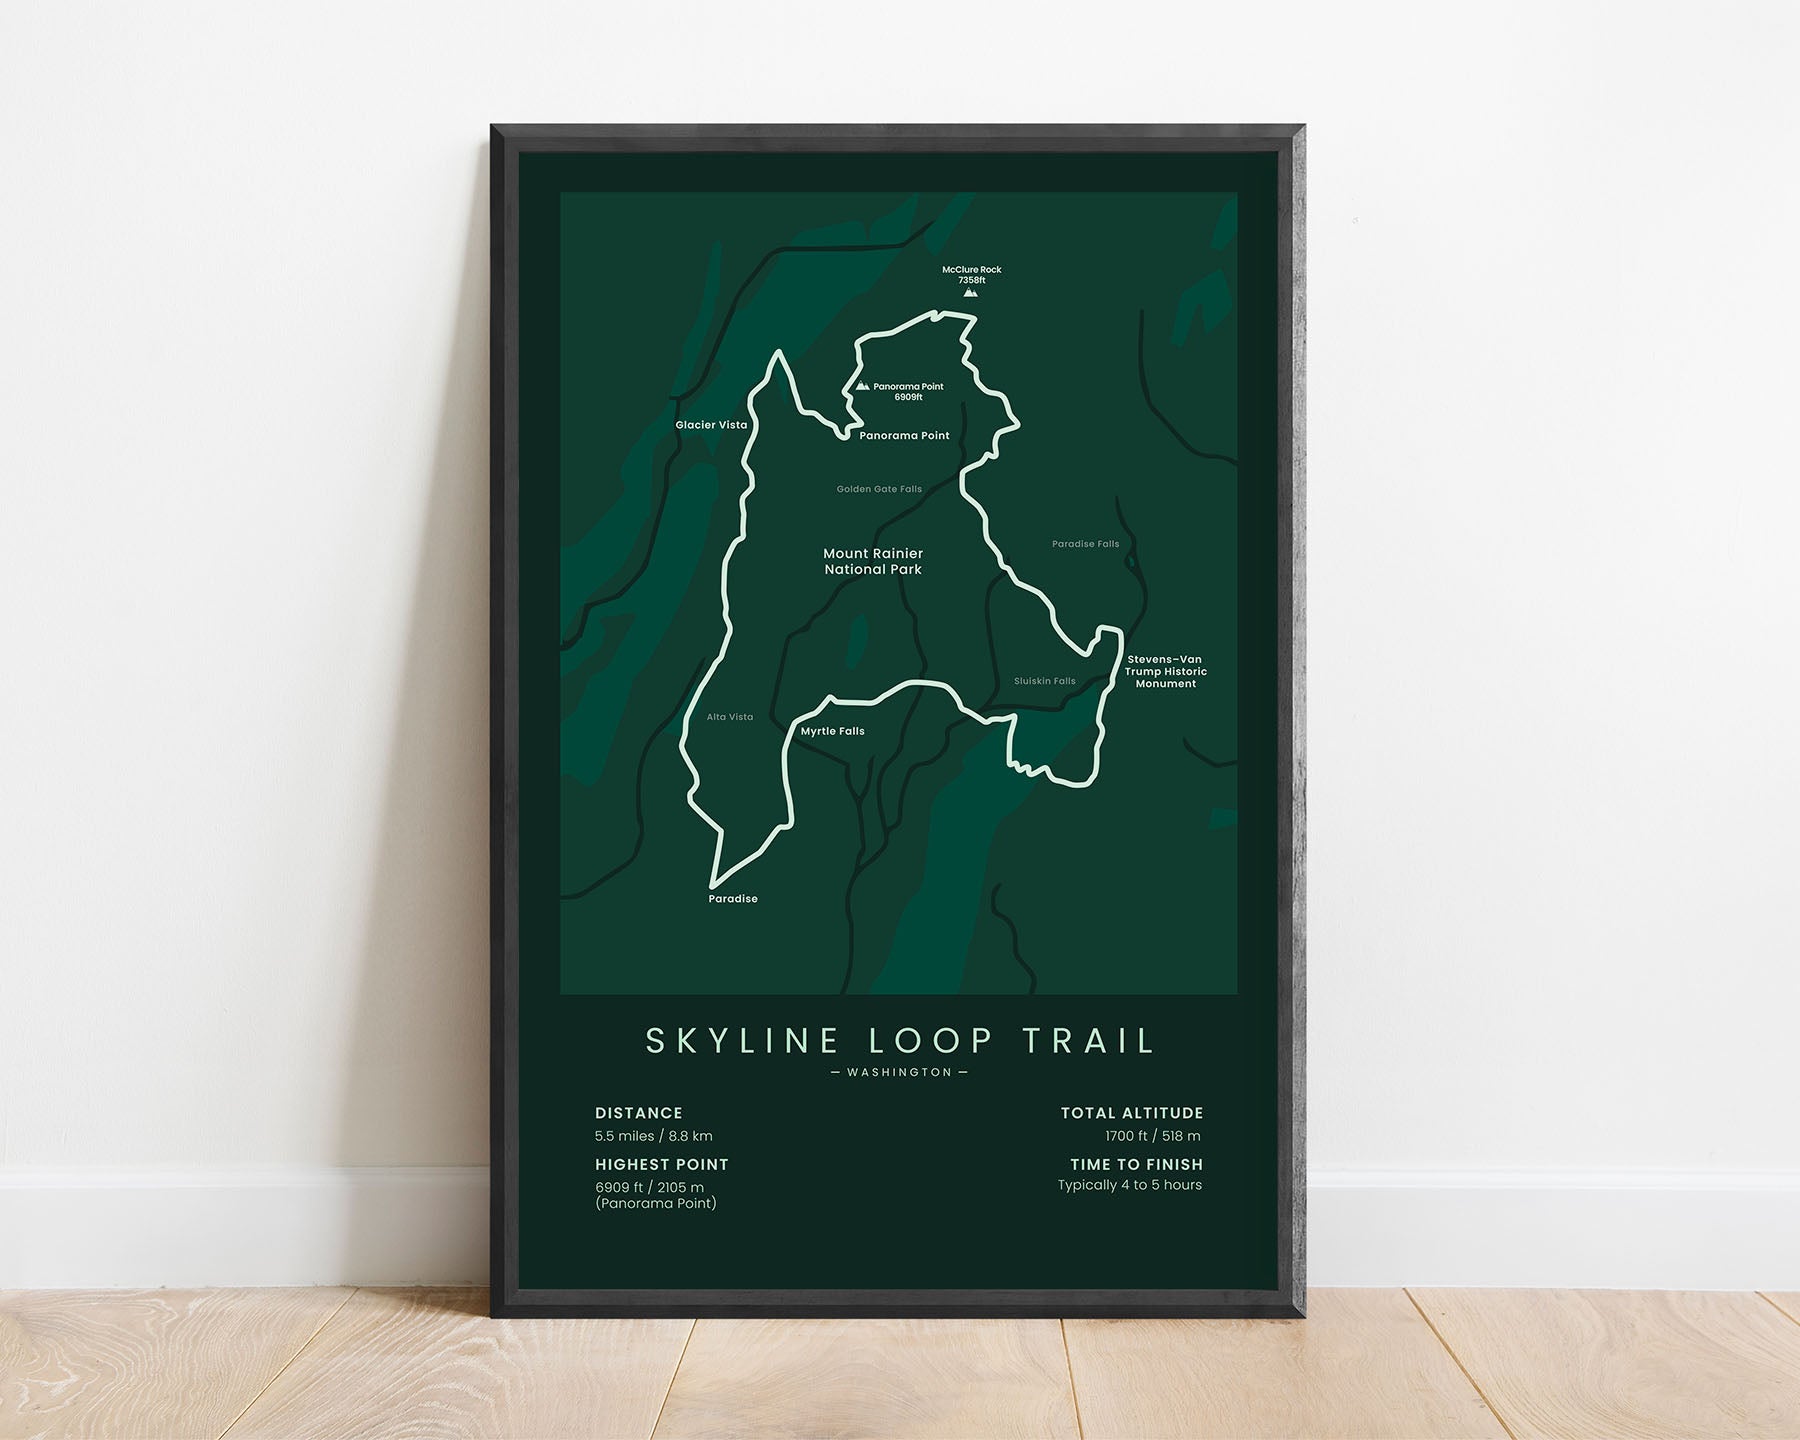 Skyline Loop Trail (United States) Hike Wall Art with Green Background